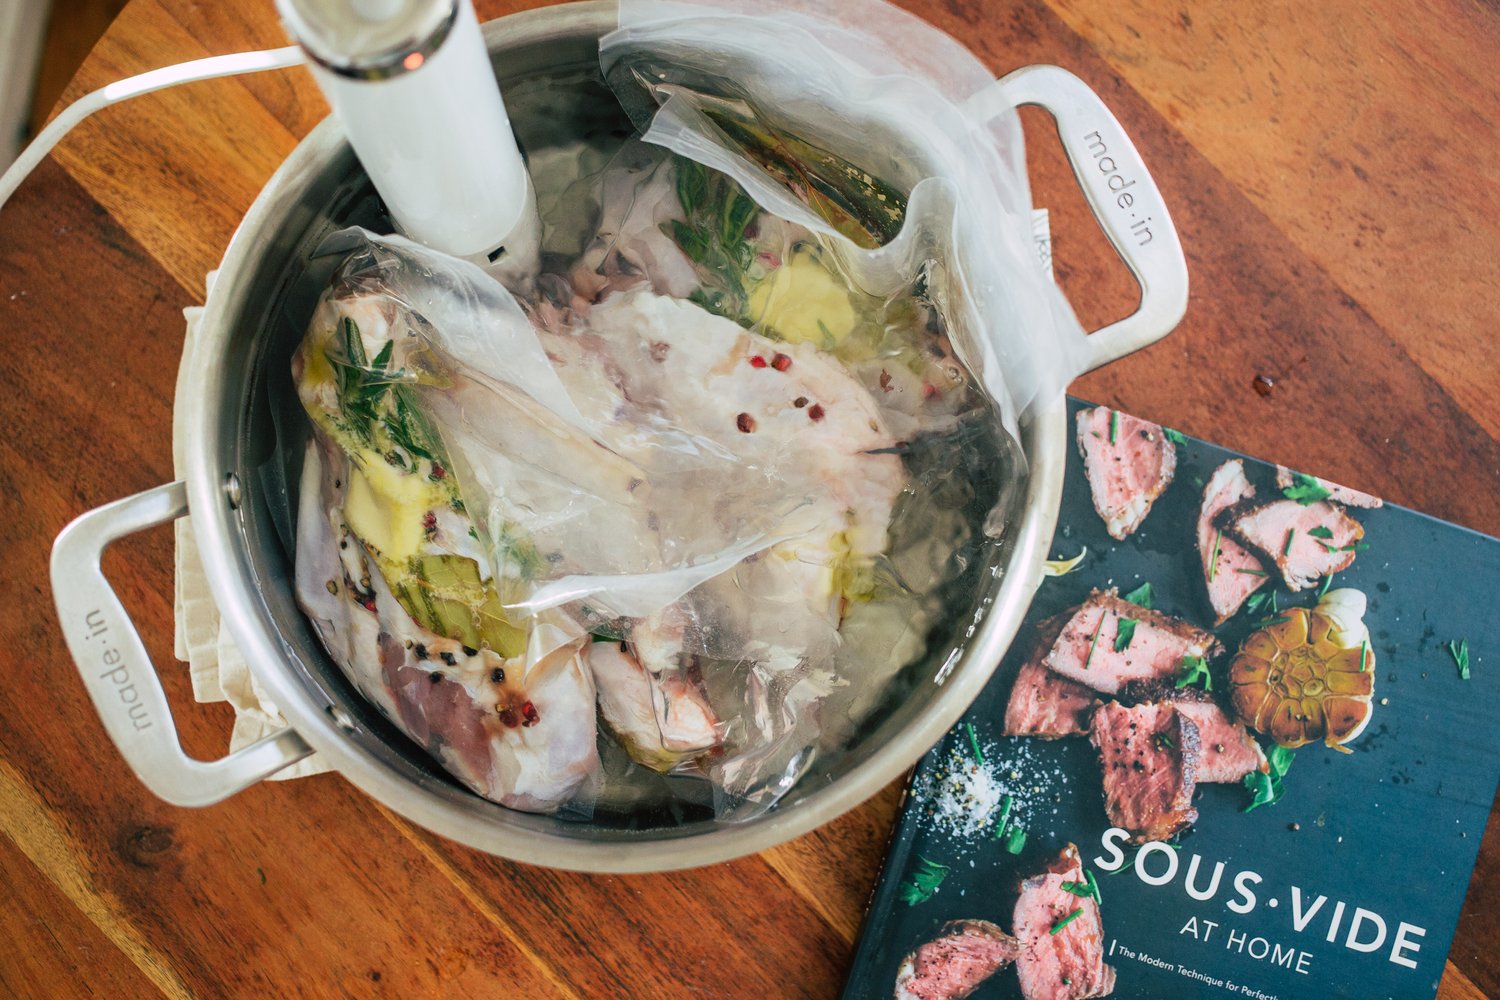 Tips for Cooking Sous Vide at Home